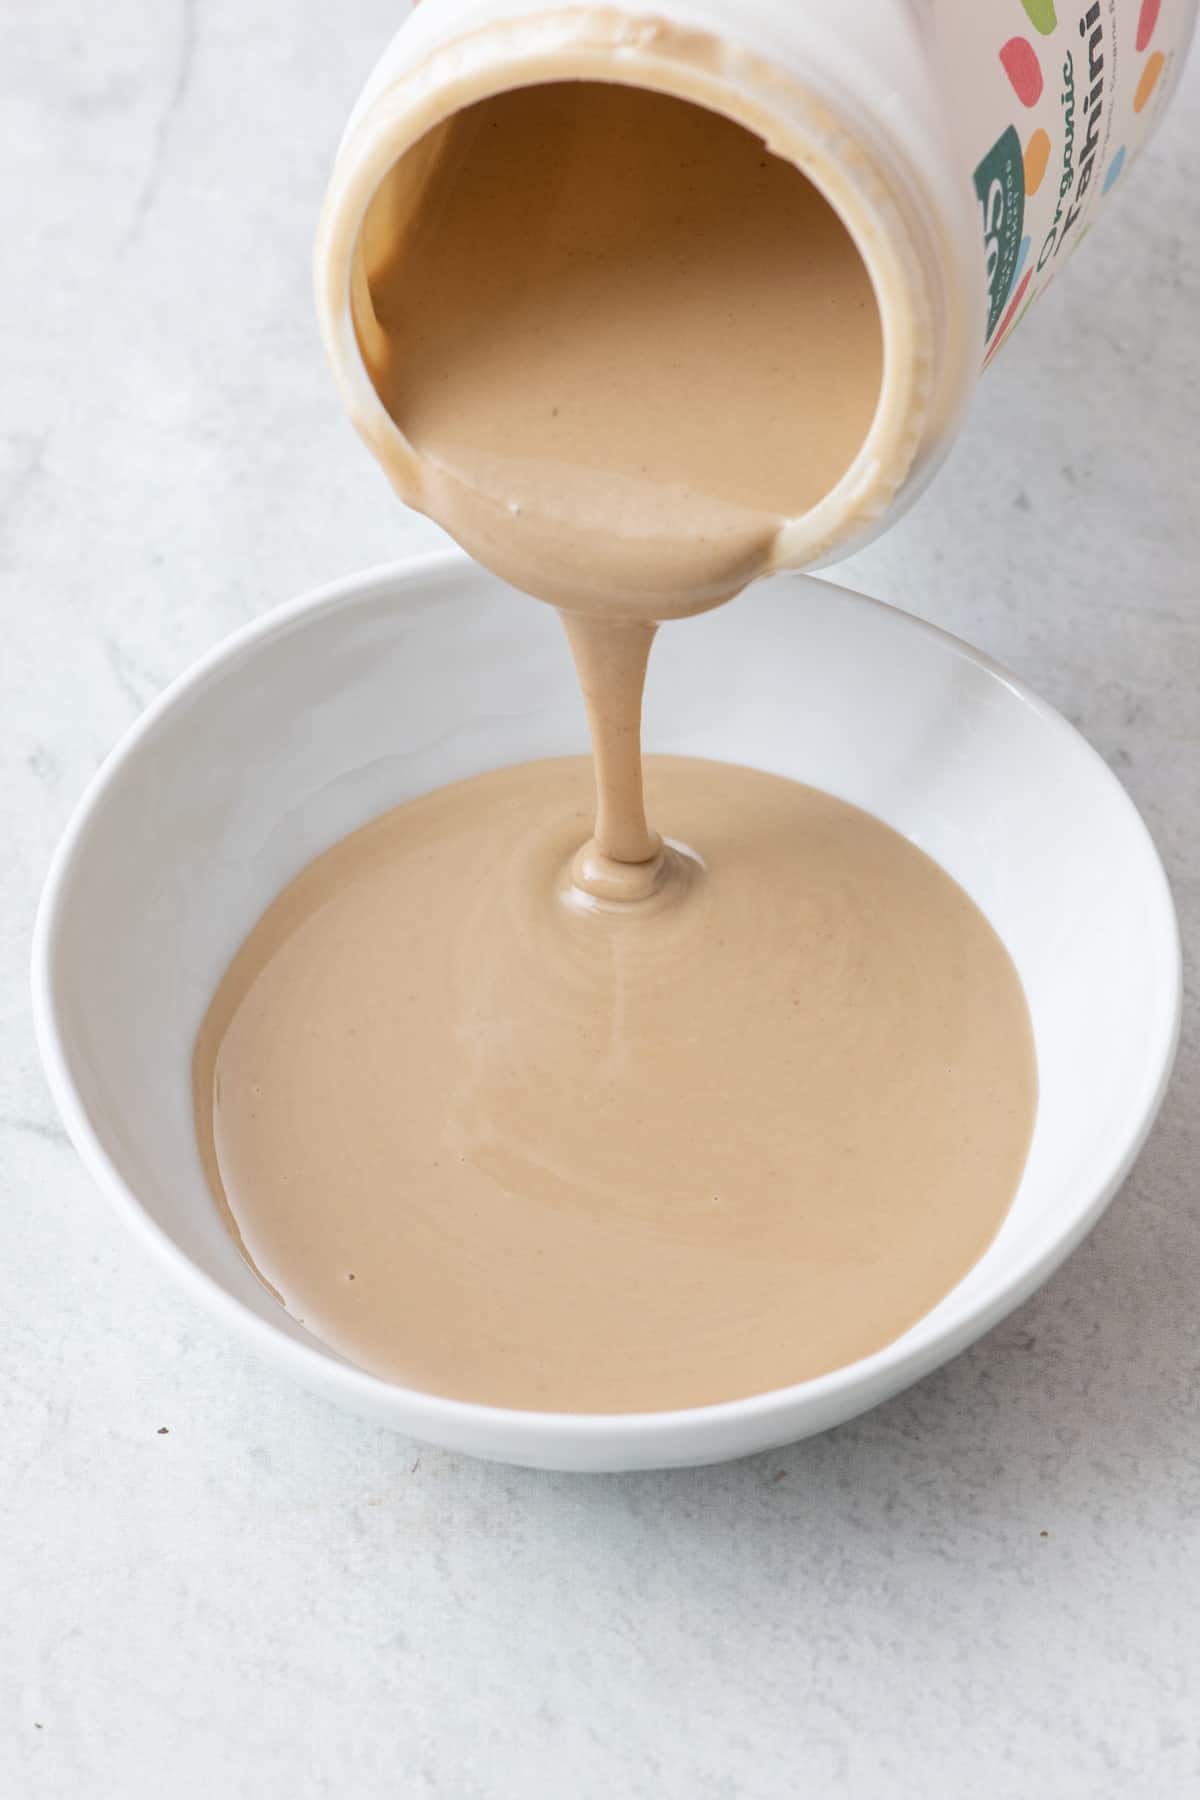 Tahini being poured into a bowl from a jar.